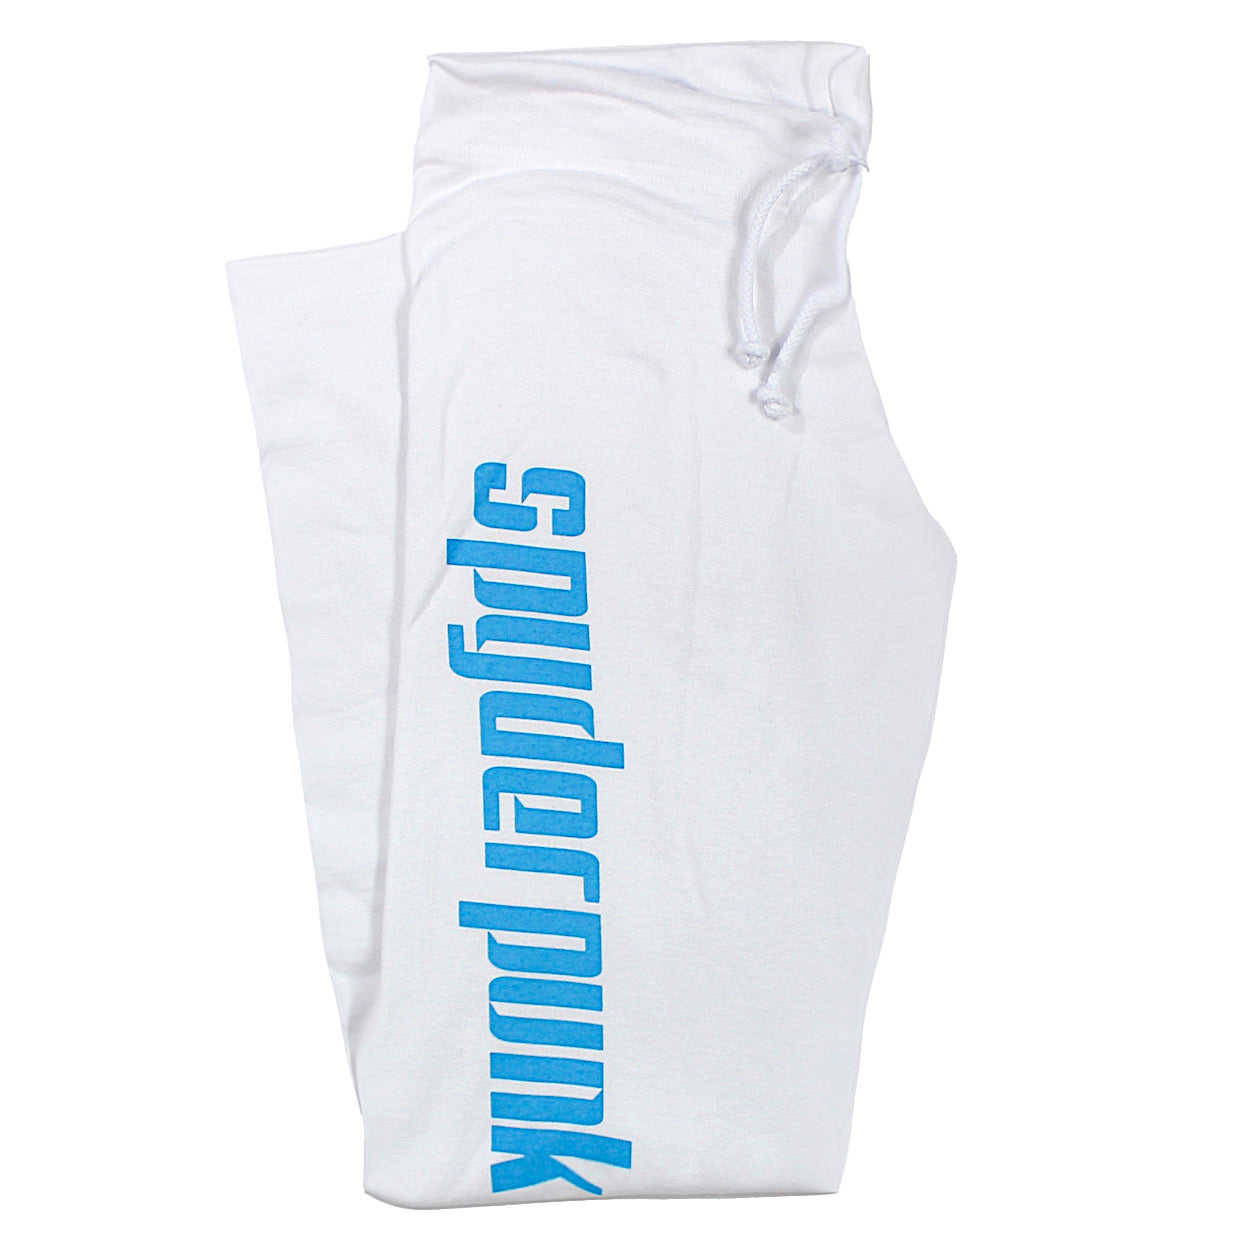 Women's Fleece Joggers Lounge Pants Available In 2 colors